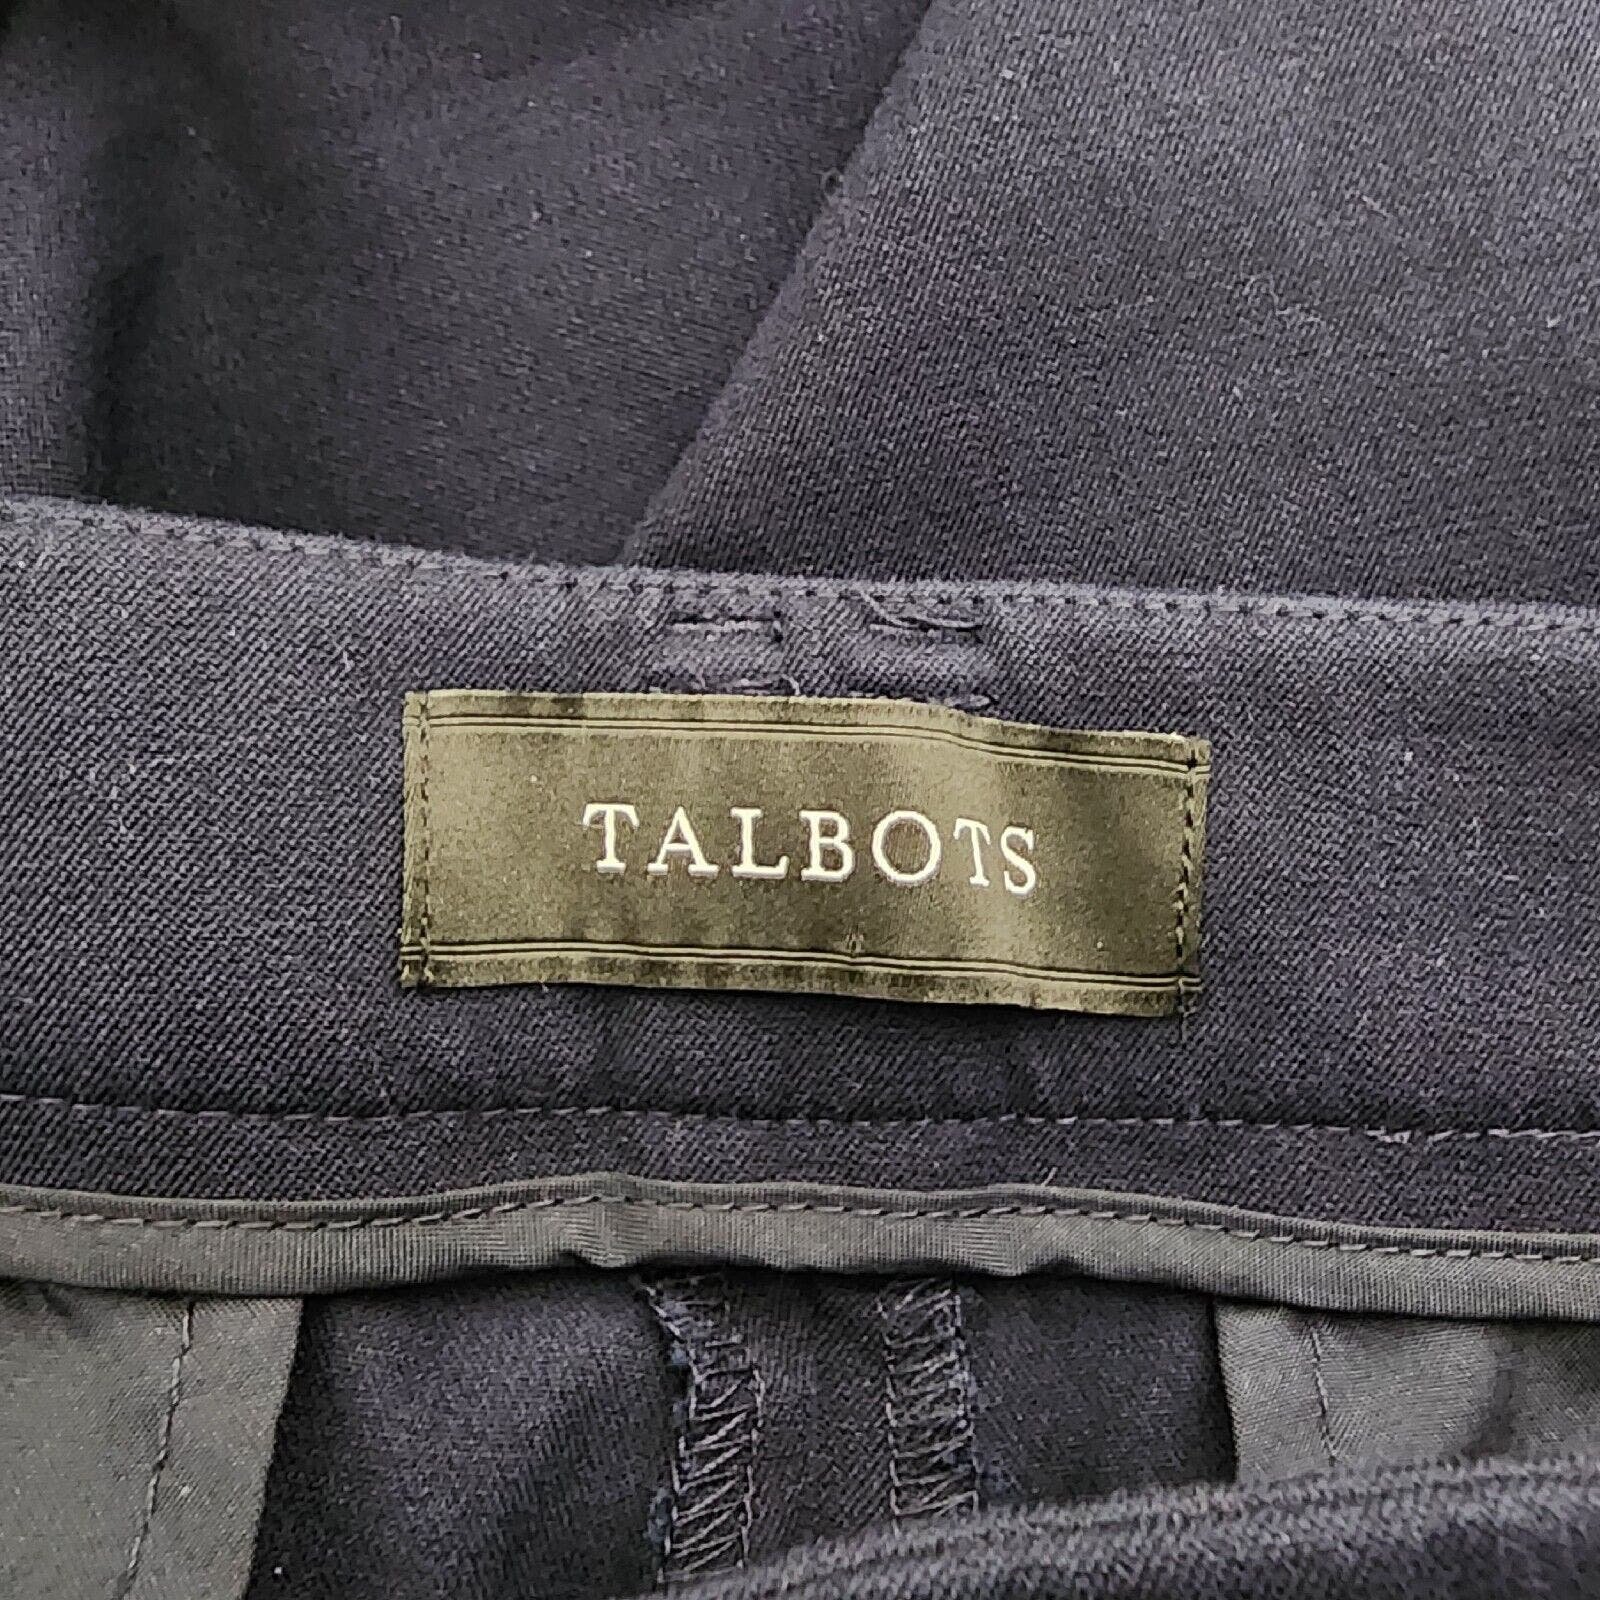 Classic Talbots Womens Pants Size 12 Petite Navy High Waist Straight Trouser Career Work m2pPbvzma just for you